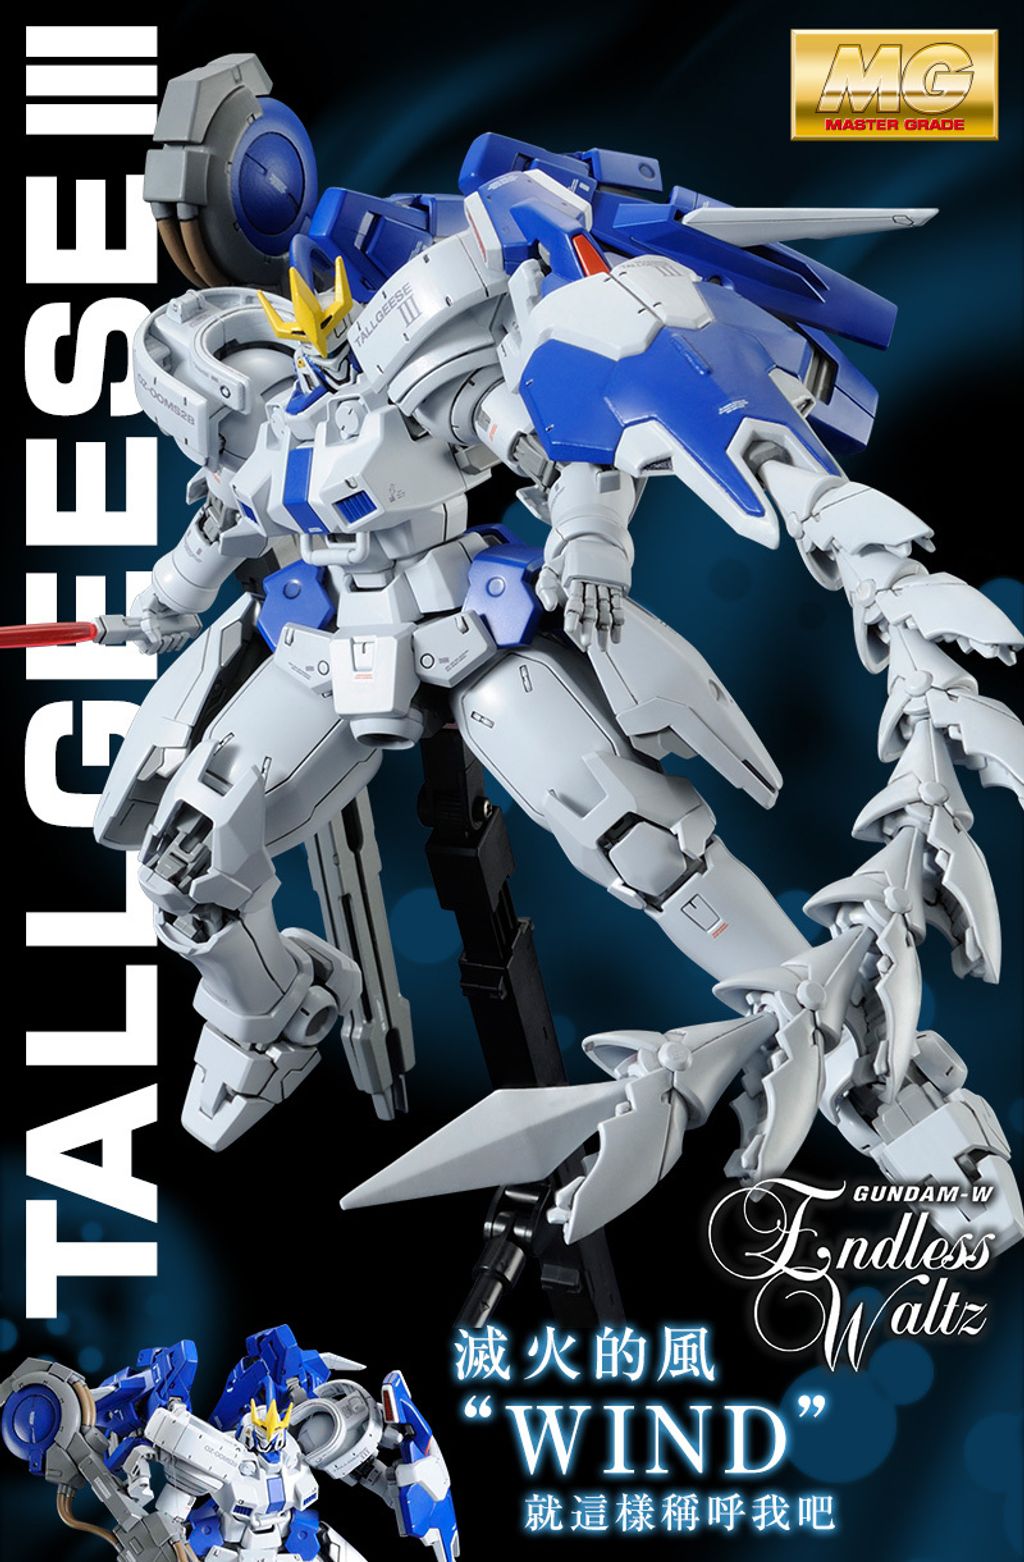 special_tallgeese_hk_02